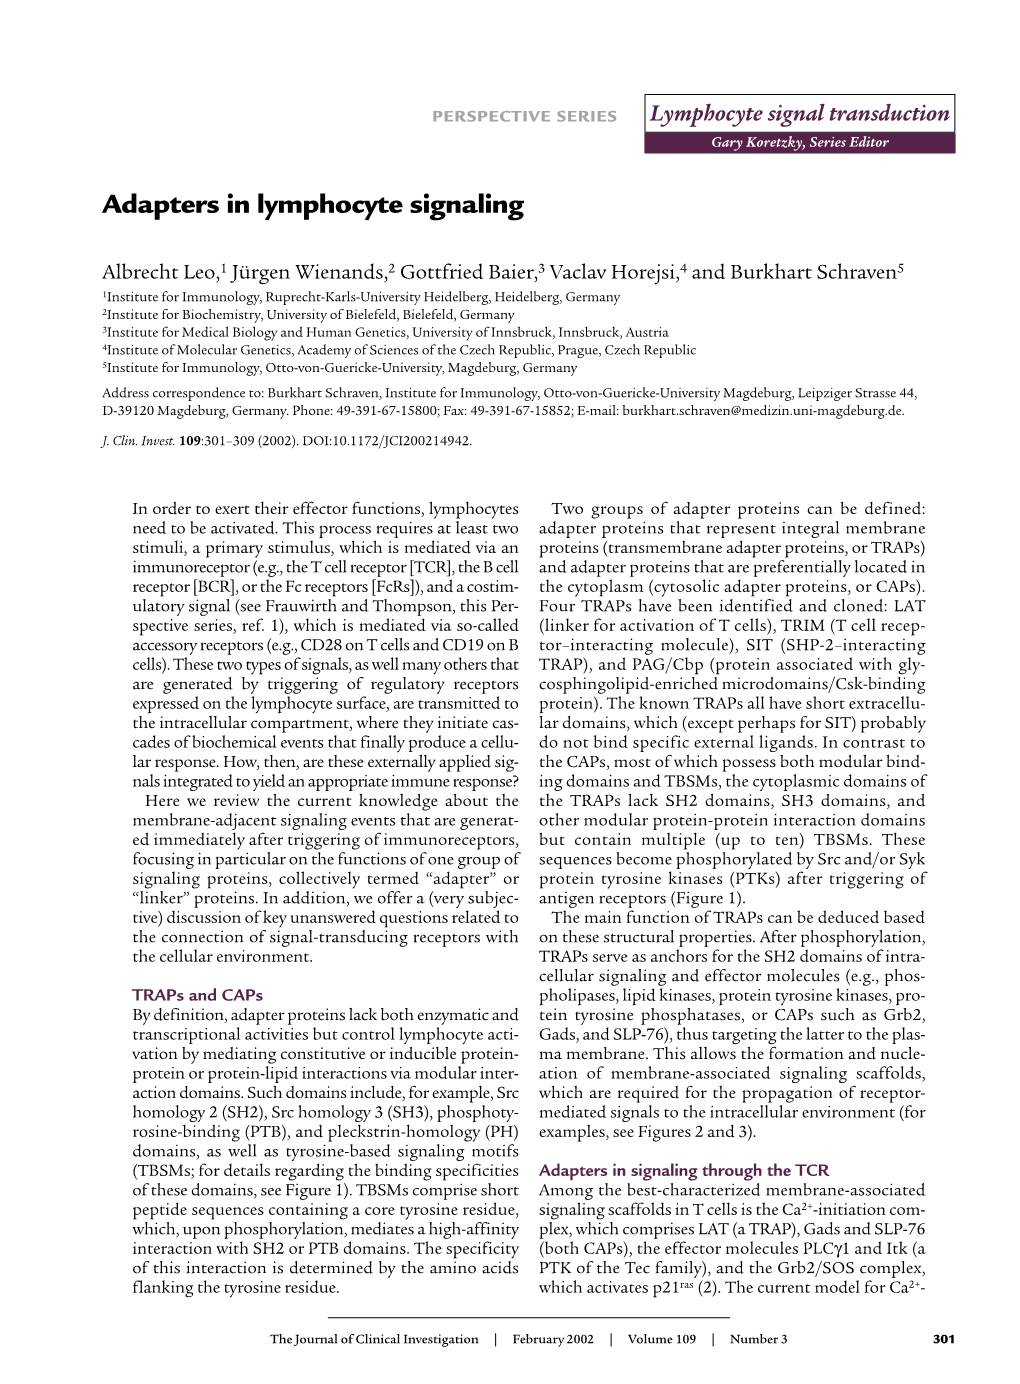 Adapters in Lymphocyte Signaling